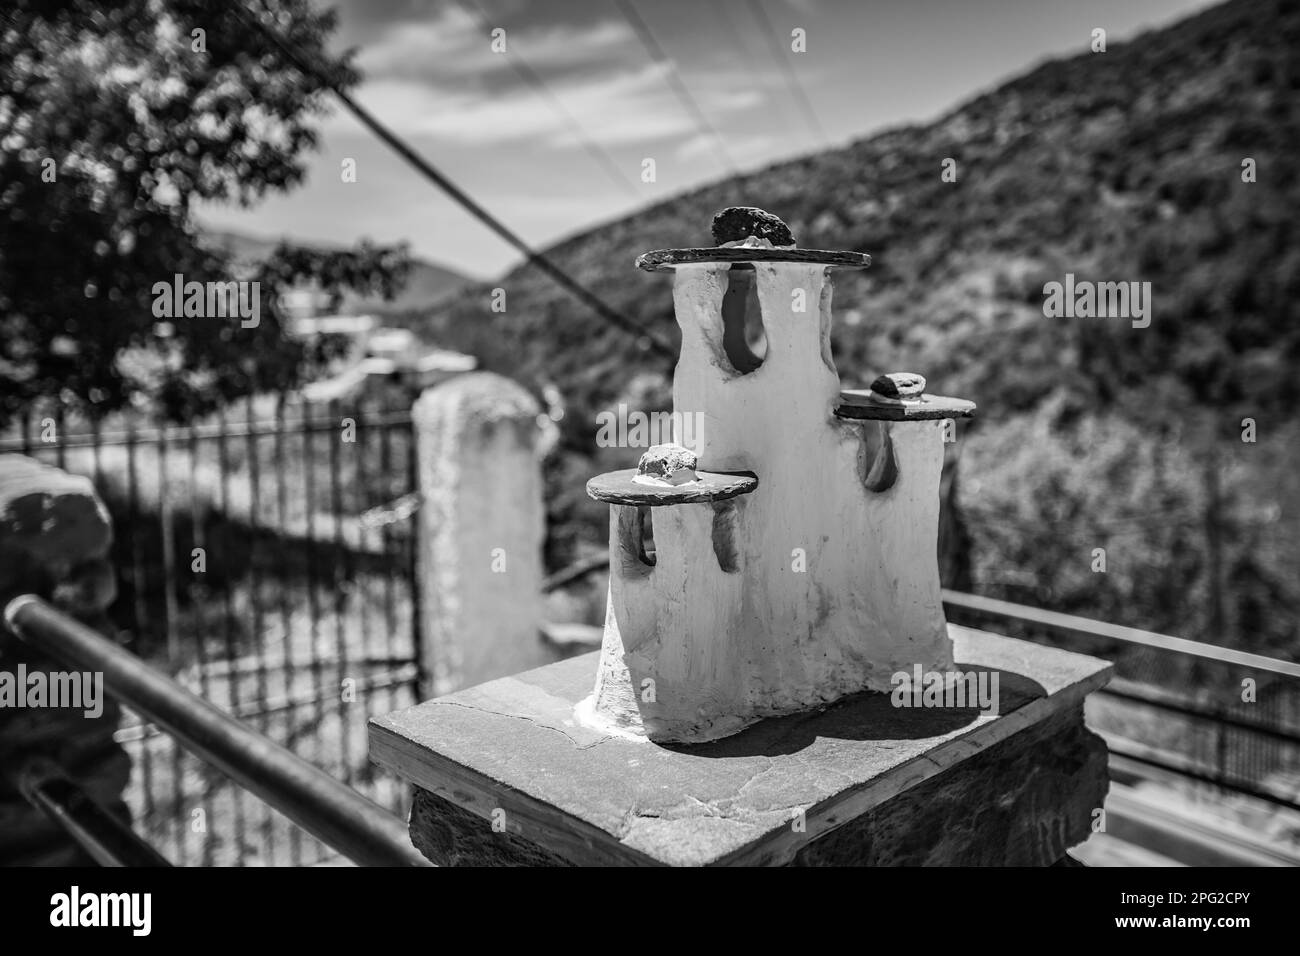 Public street fence decorations in the shapes of miniature chimneys could be seen at the village of Pampaneira, Andalusia, Spain. Black and white phot Stock Photo